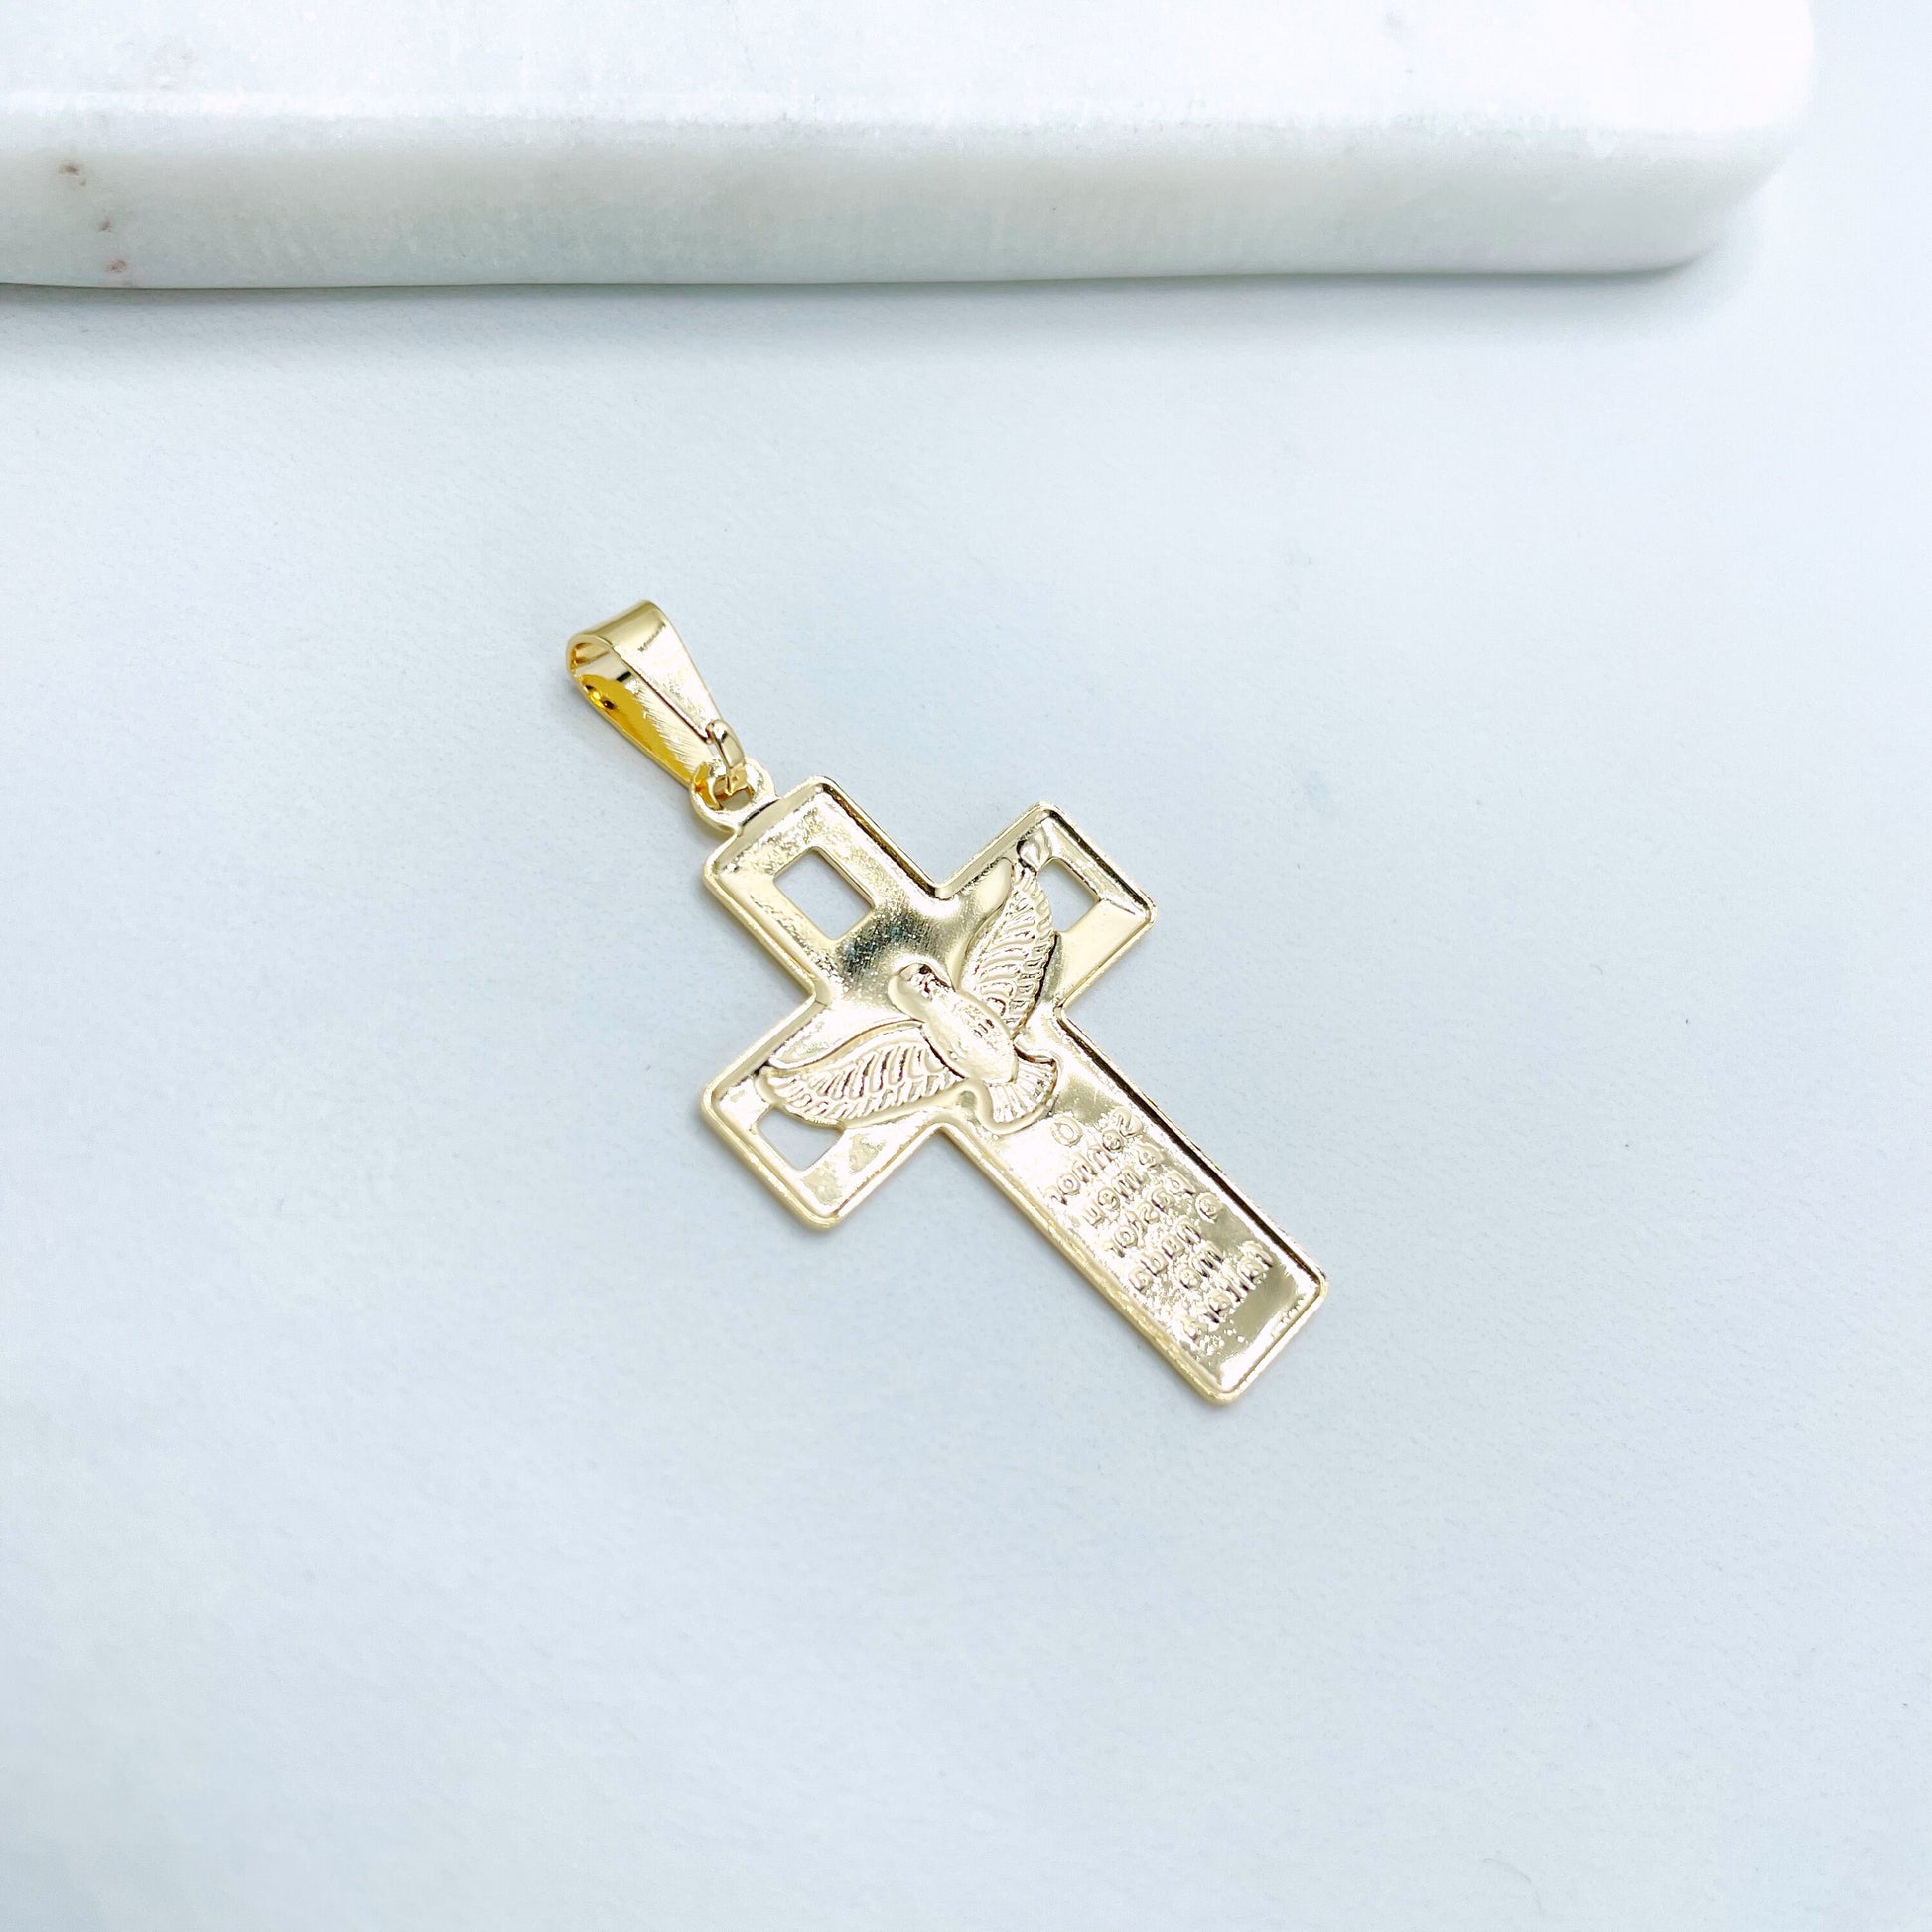 18k Gold Filled Cross Charms Pendant with Dove & Portuguese Bible 23 Psalm Description, Wholesale Jewelry Making Supplies